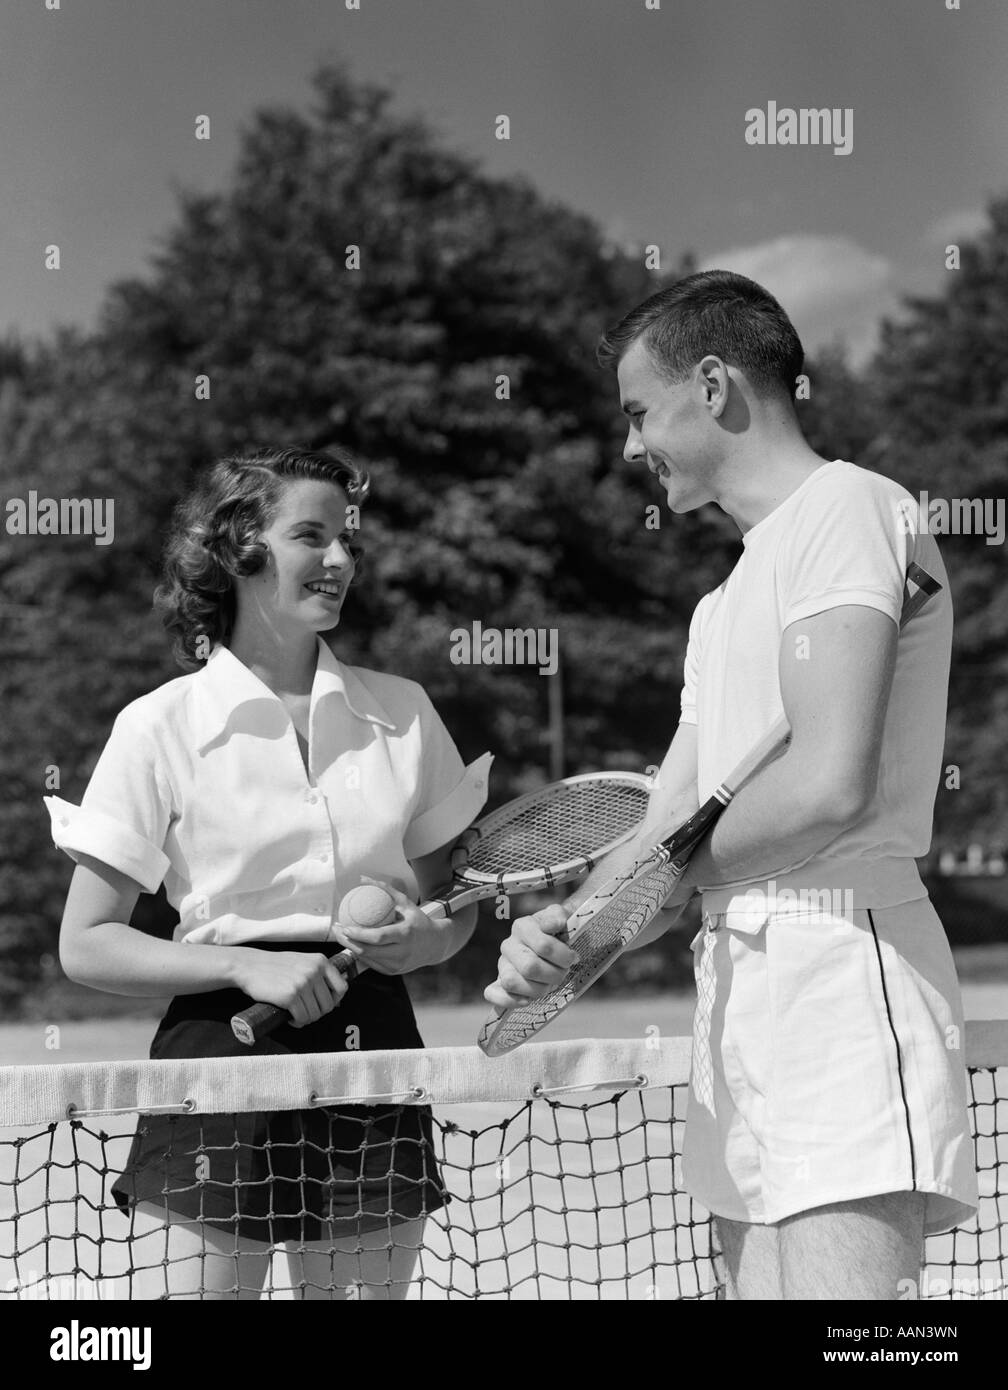 1950s COUPLE STANDING ON OPPOSITE SIDES OF NET HOLDING TENNIS RACQUETS Stock Photo